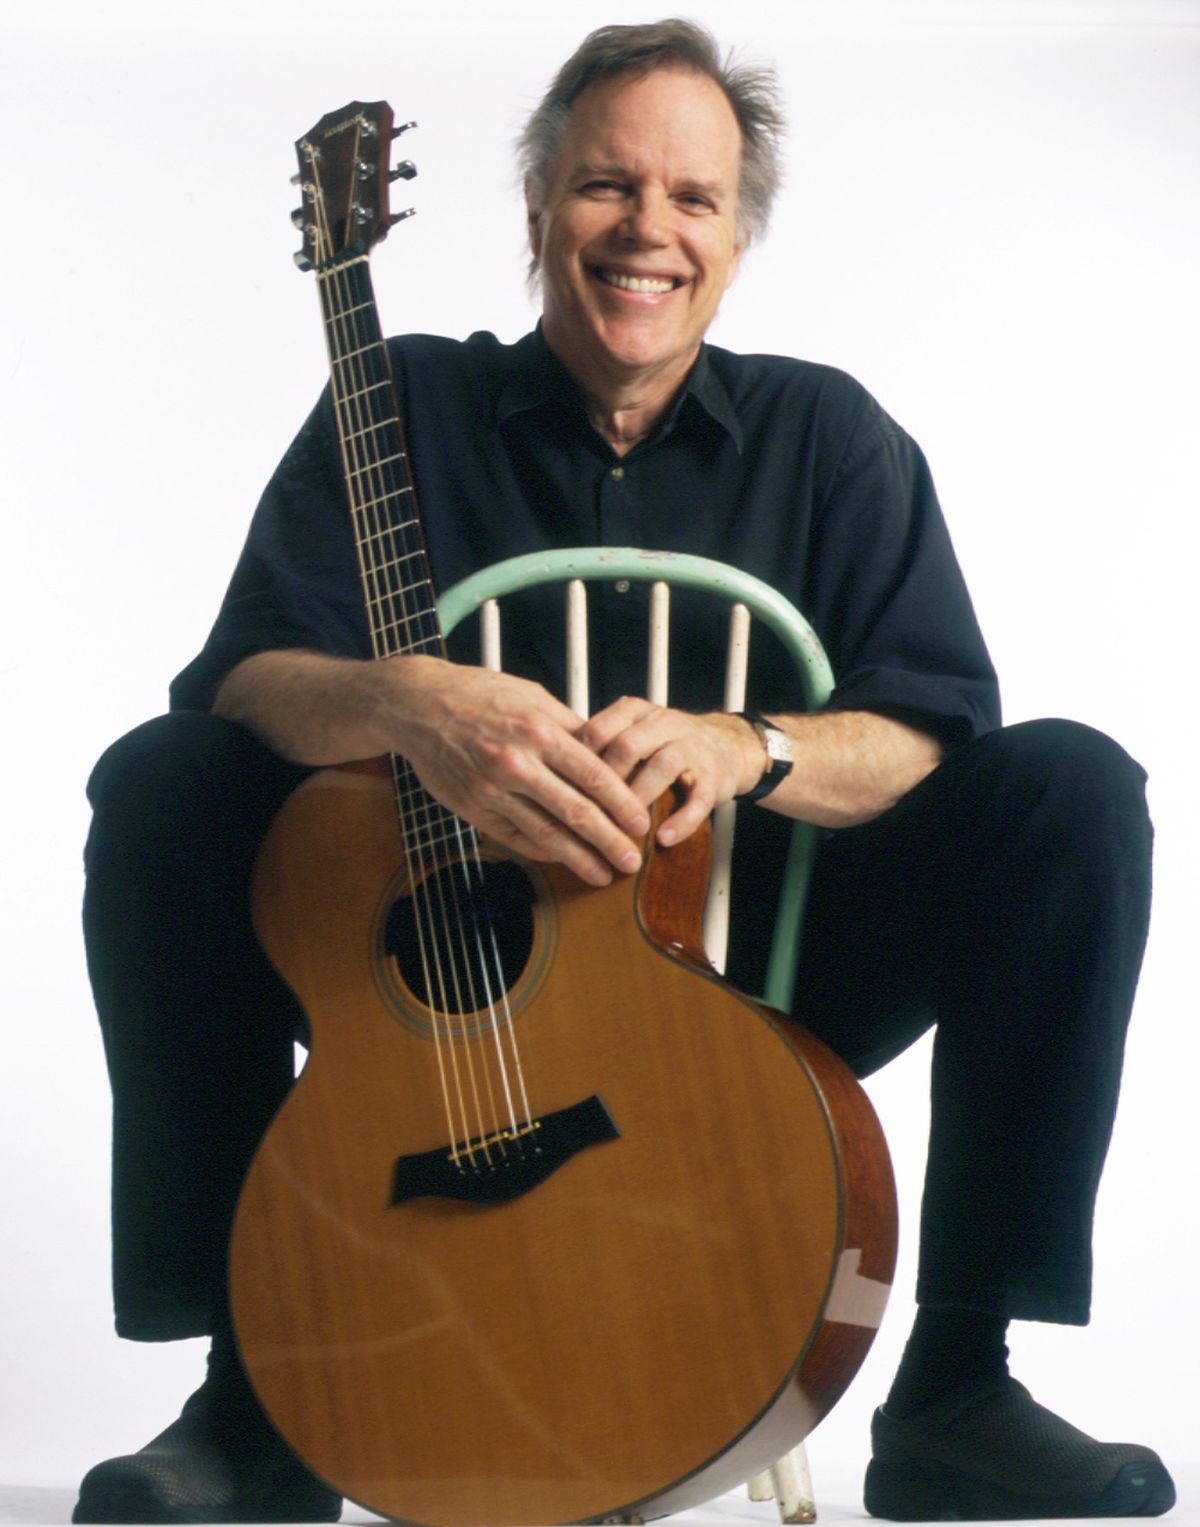 Leo Kottke relearned to play the guitar after suffering severe tendon damage.